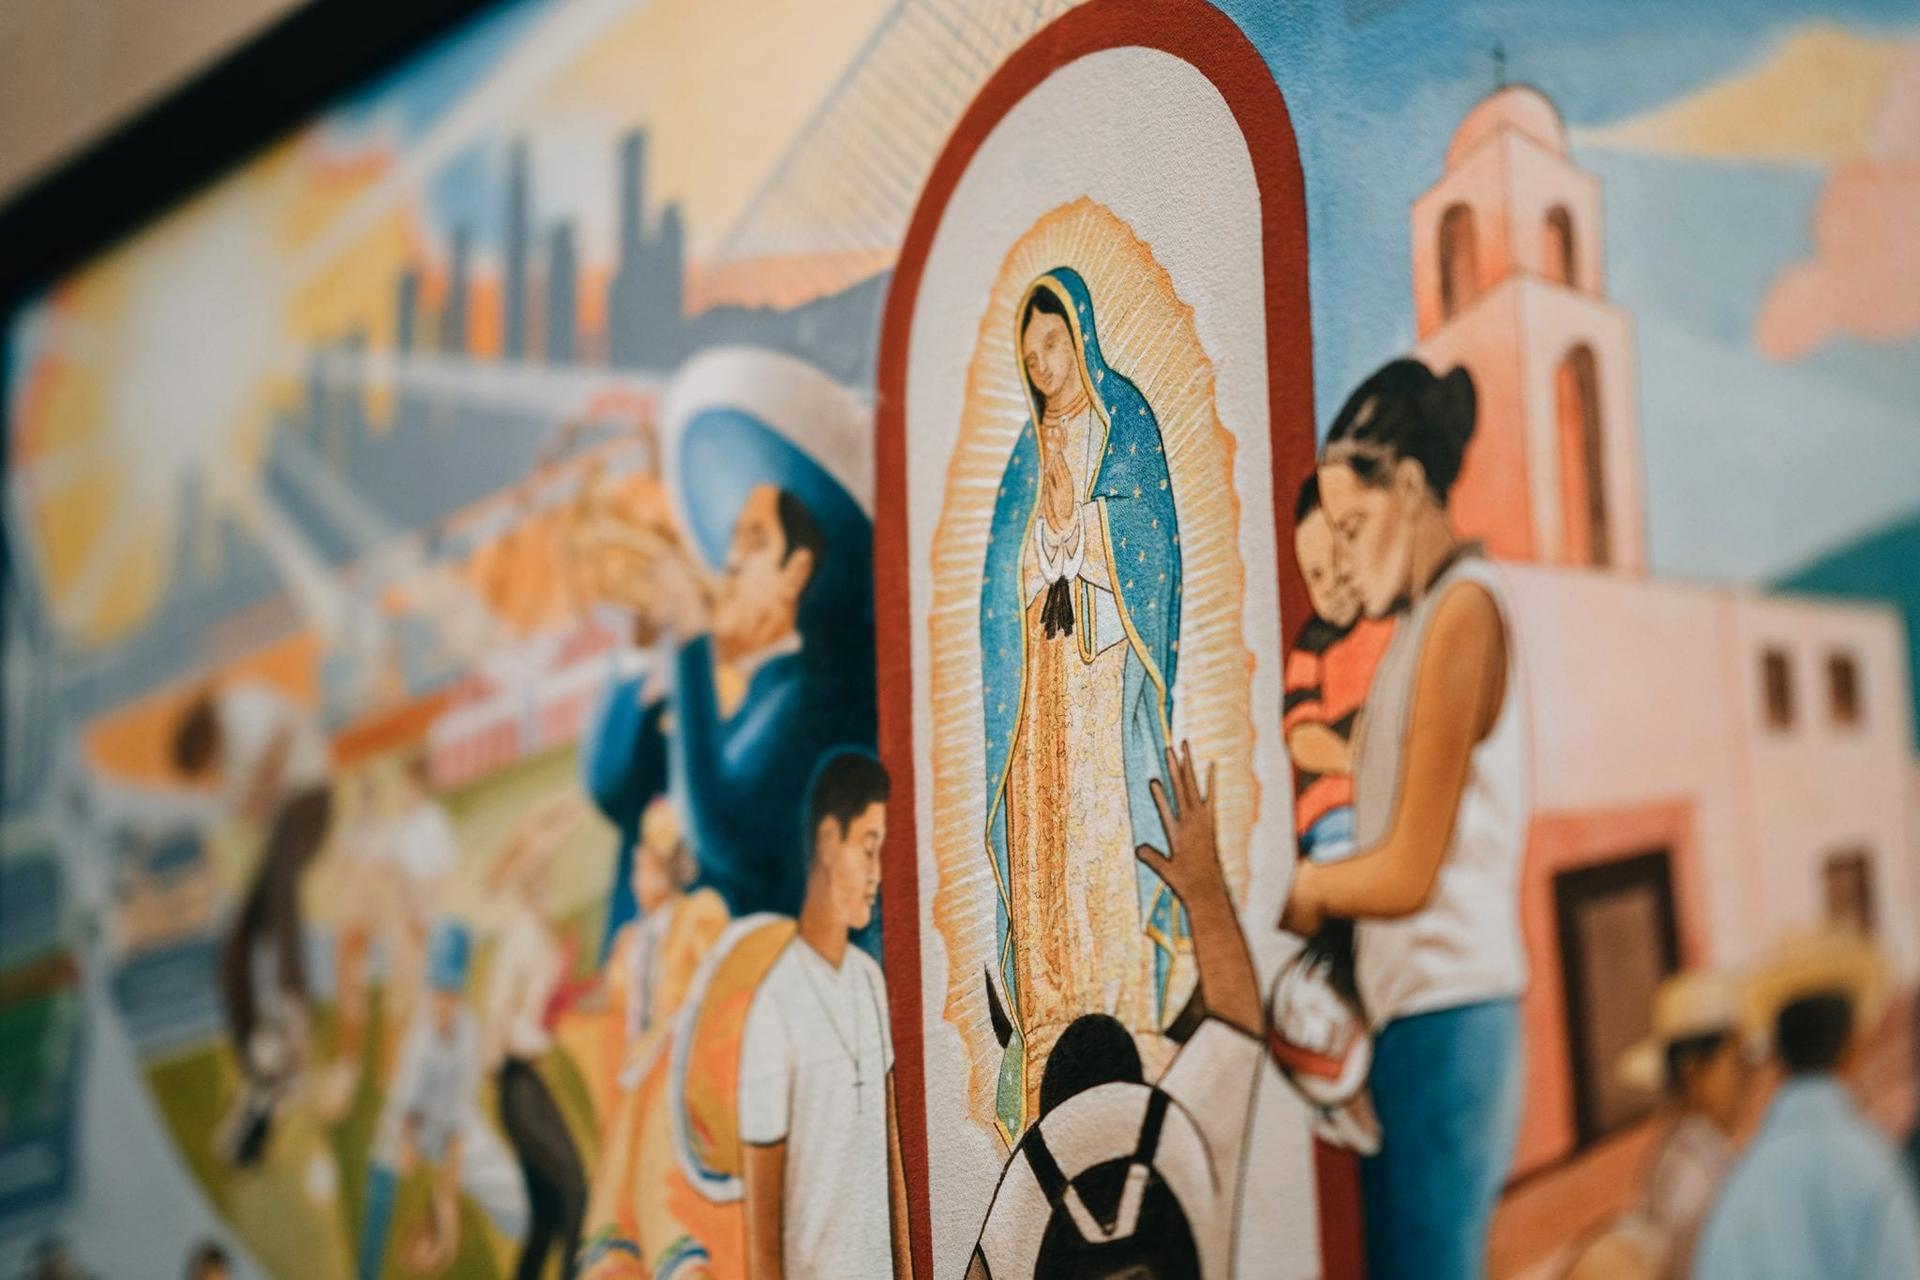 Los Angeles cathedral exhibit honors Our Lady of Guadalupe, St. Juan Diego